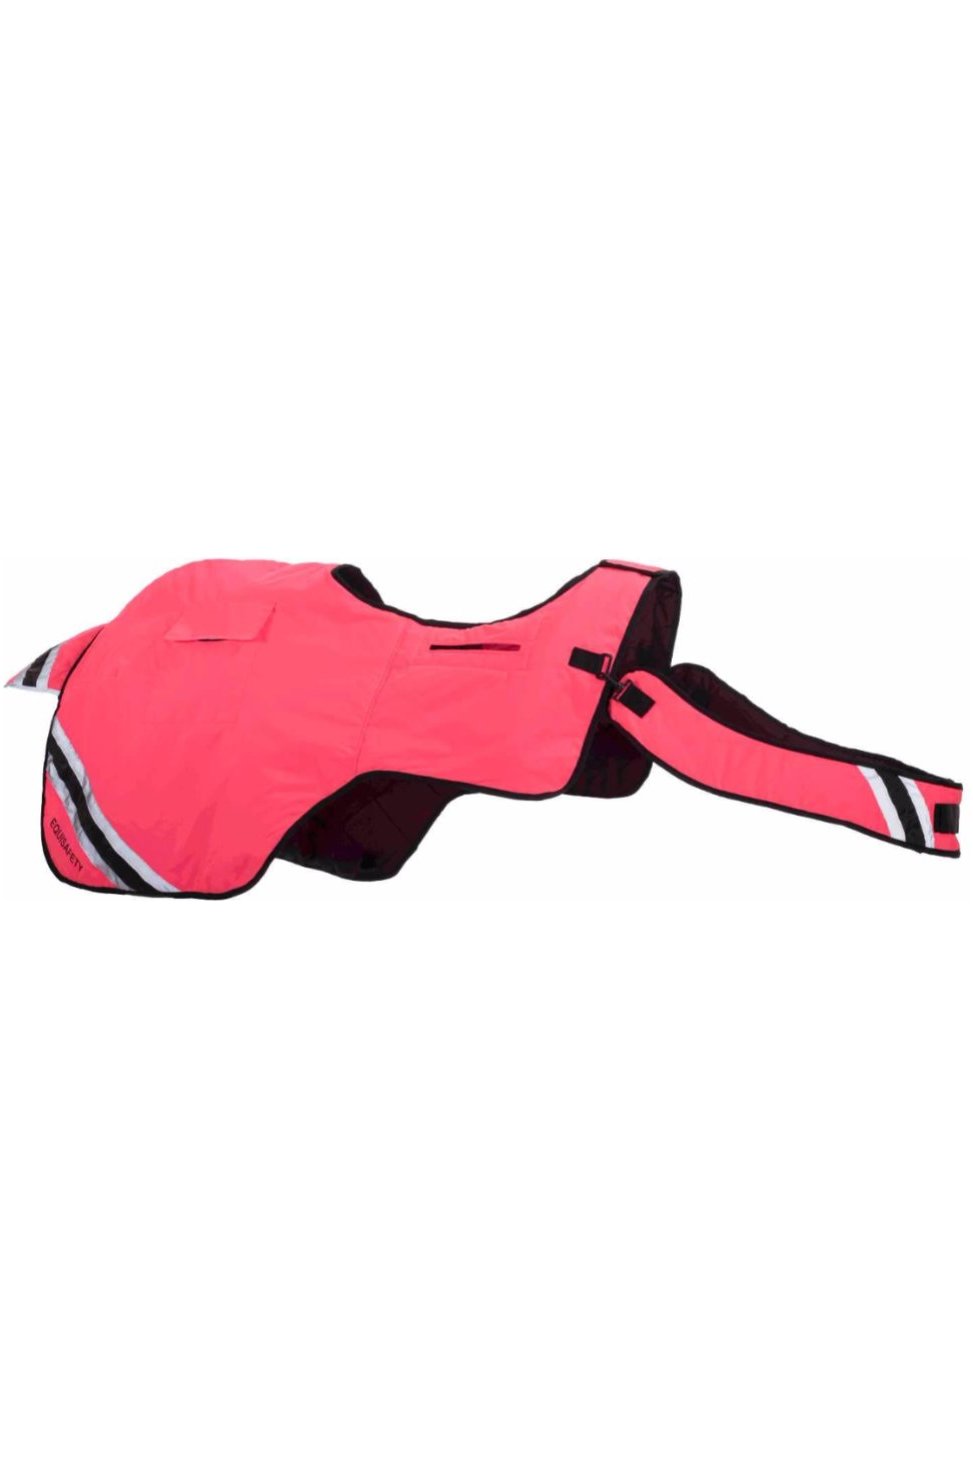 2023 Equisafety Hi-Vis Waterproof Wrap Around Exercise Rug WRUG - Pink -  Horse - | The Drillshed | Fitnessschuhe